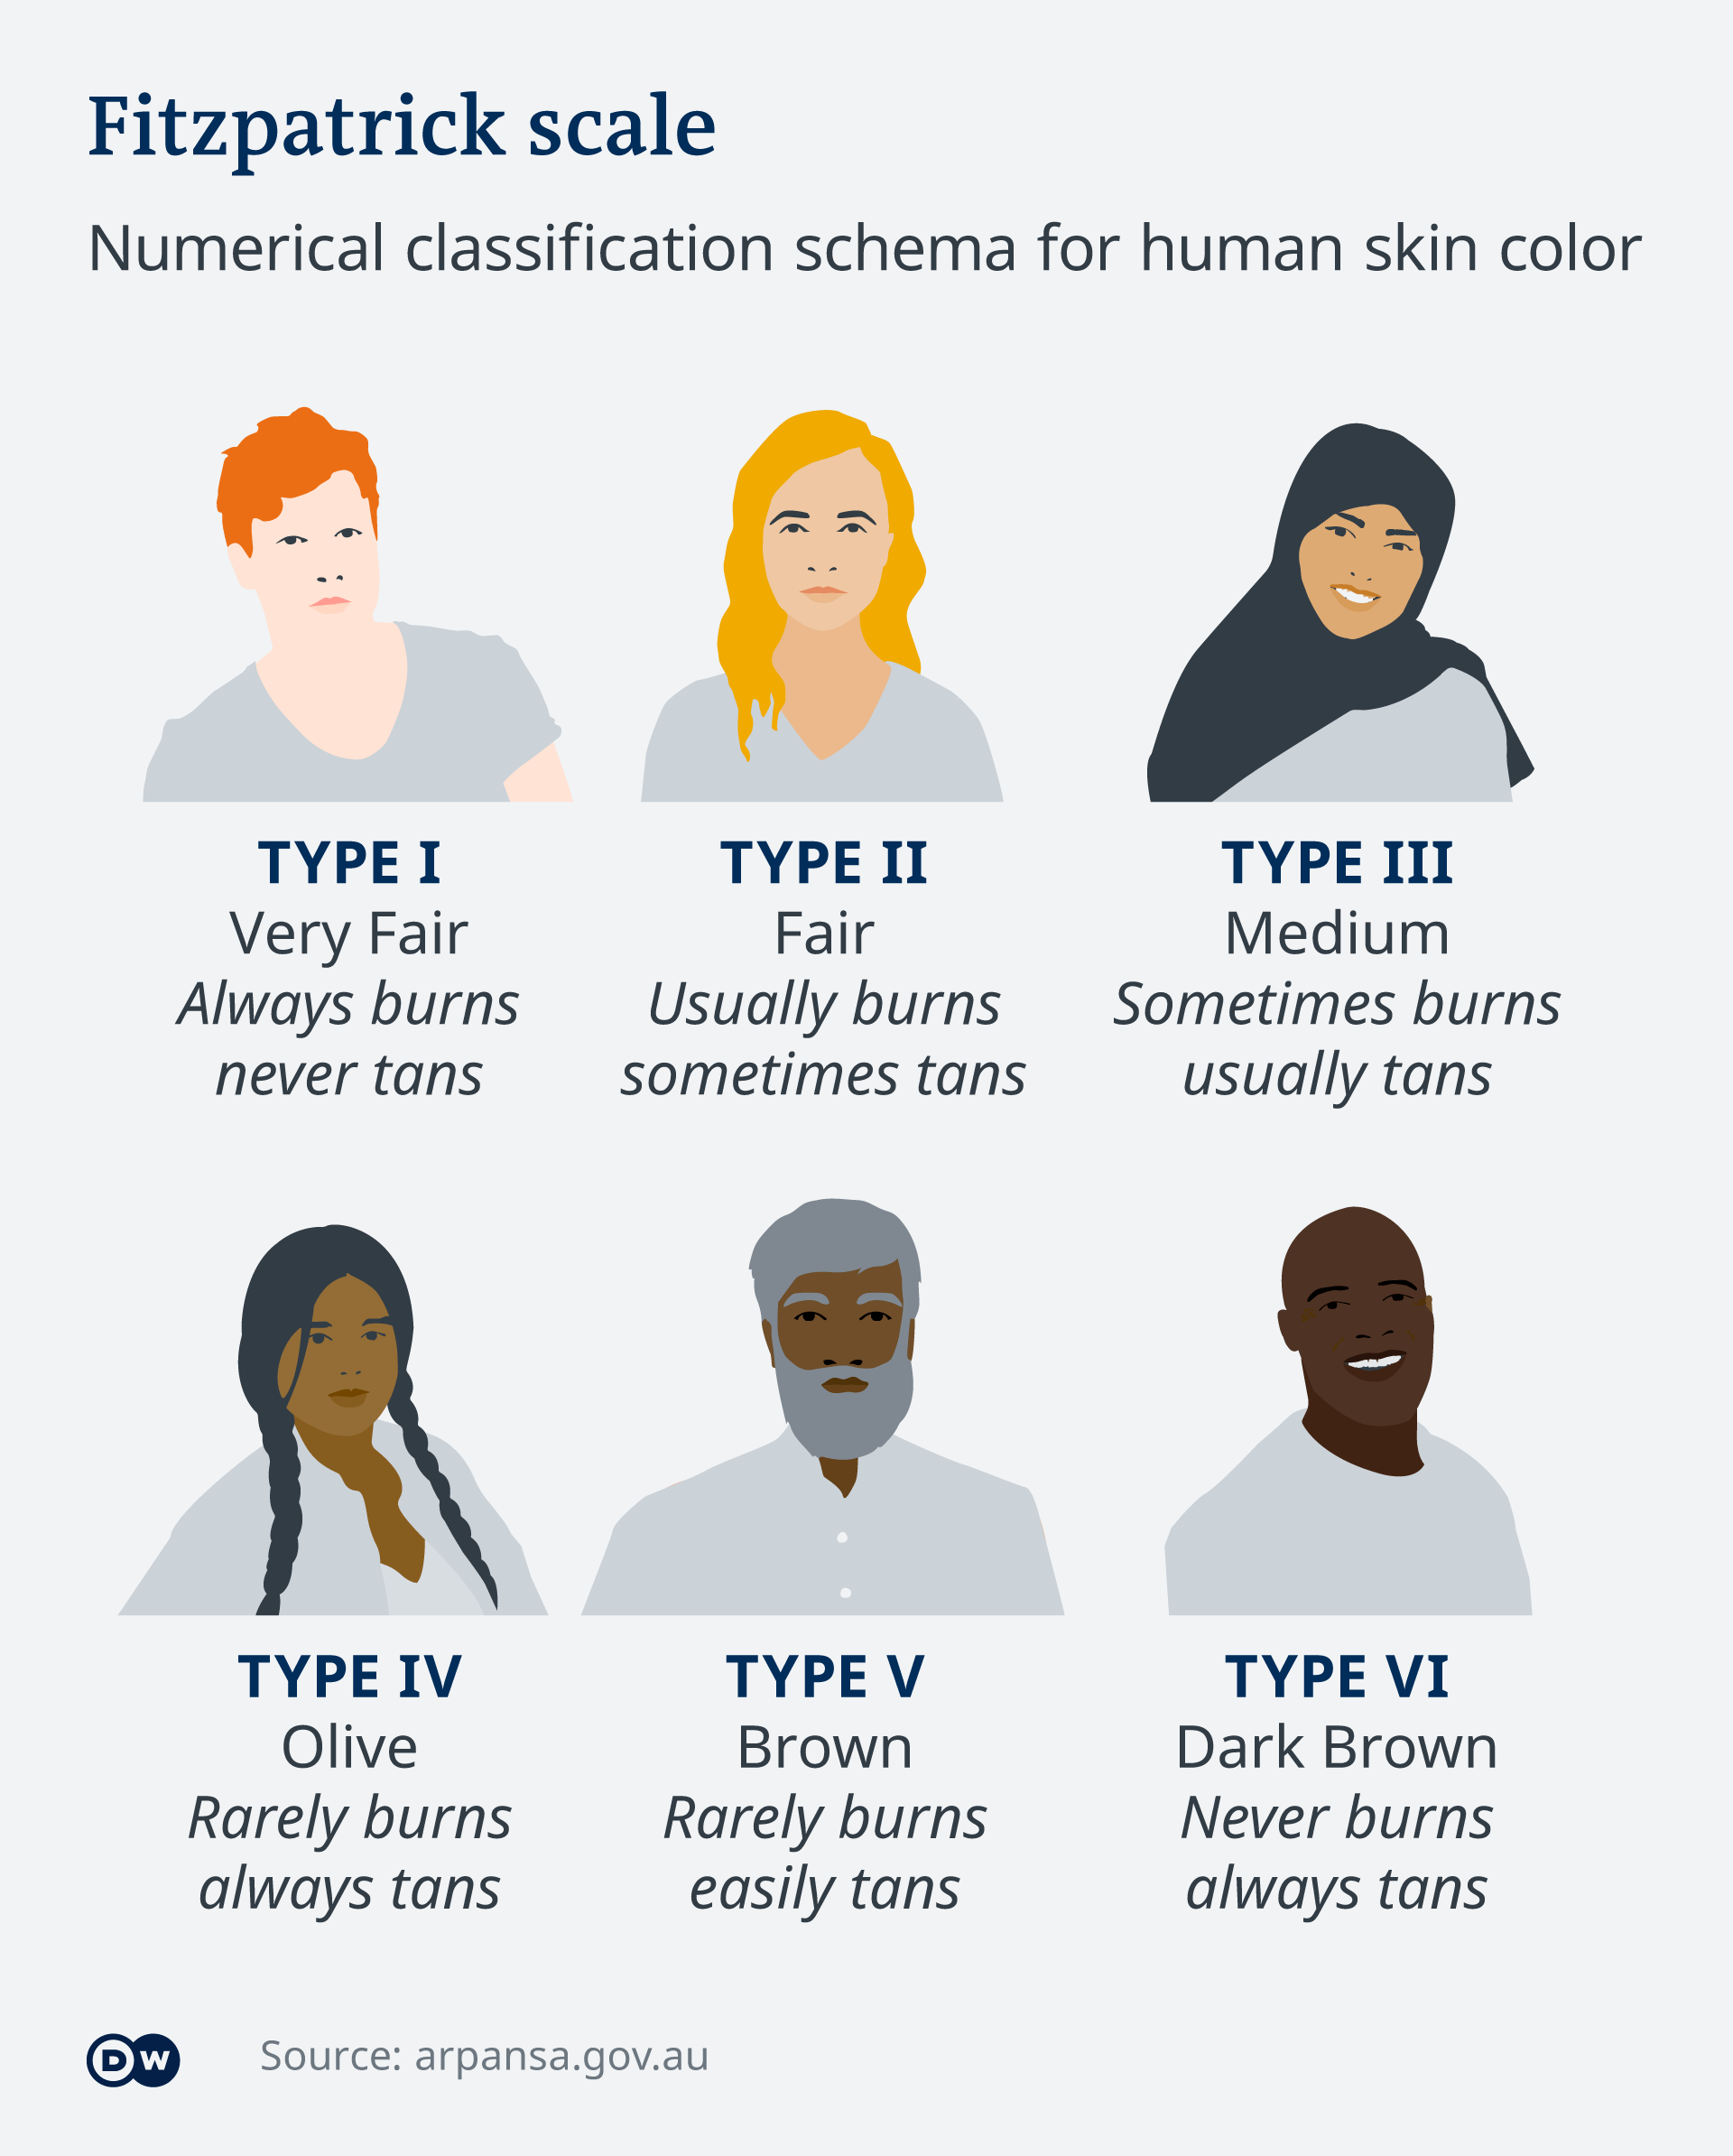 An infographic showing the different skin colors according to the Fitzpatrick scale